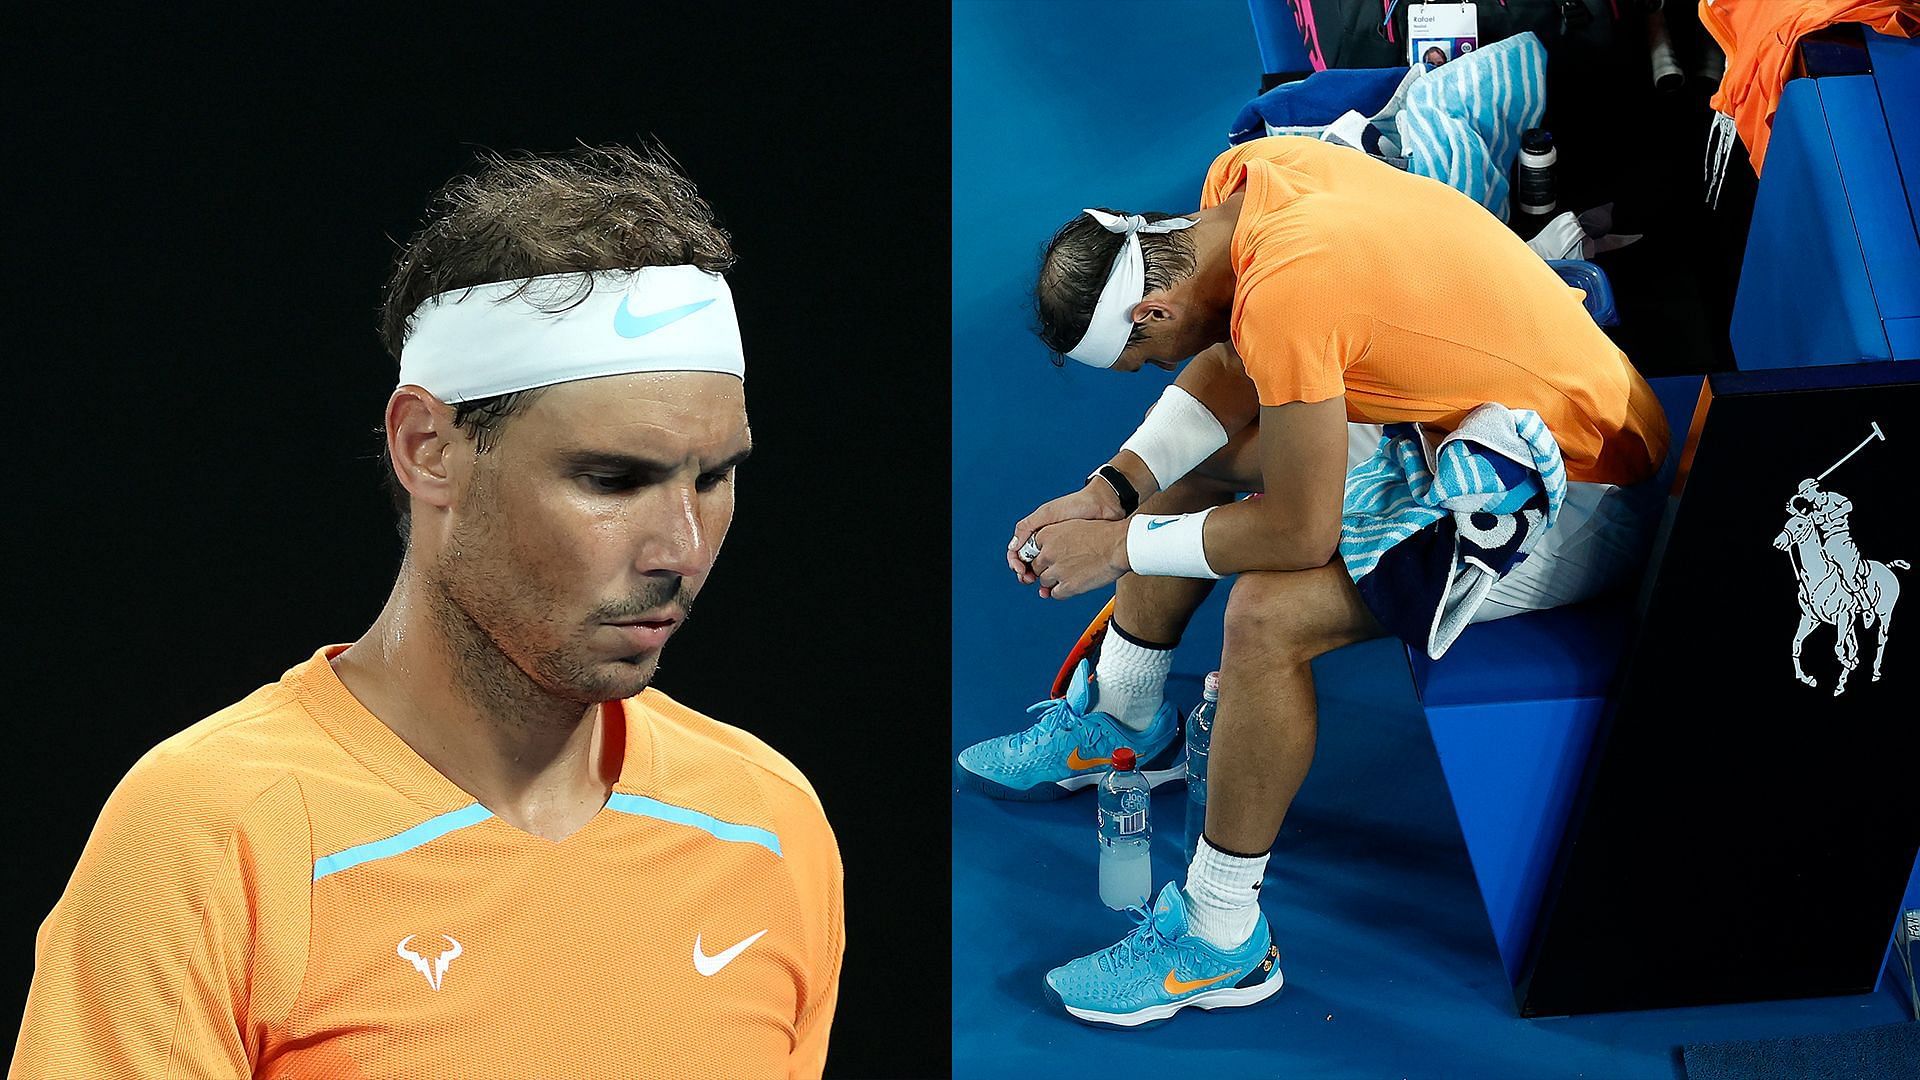 Rafael Nadal will be out of action for the next 6-8 weeks